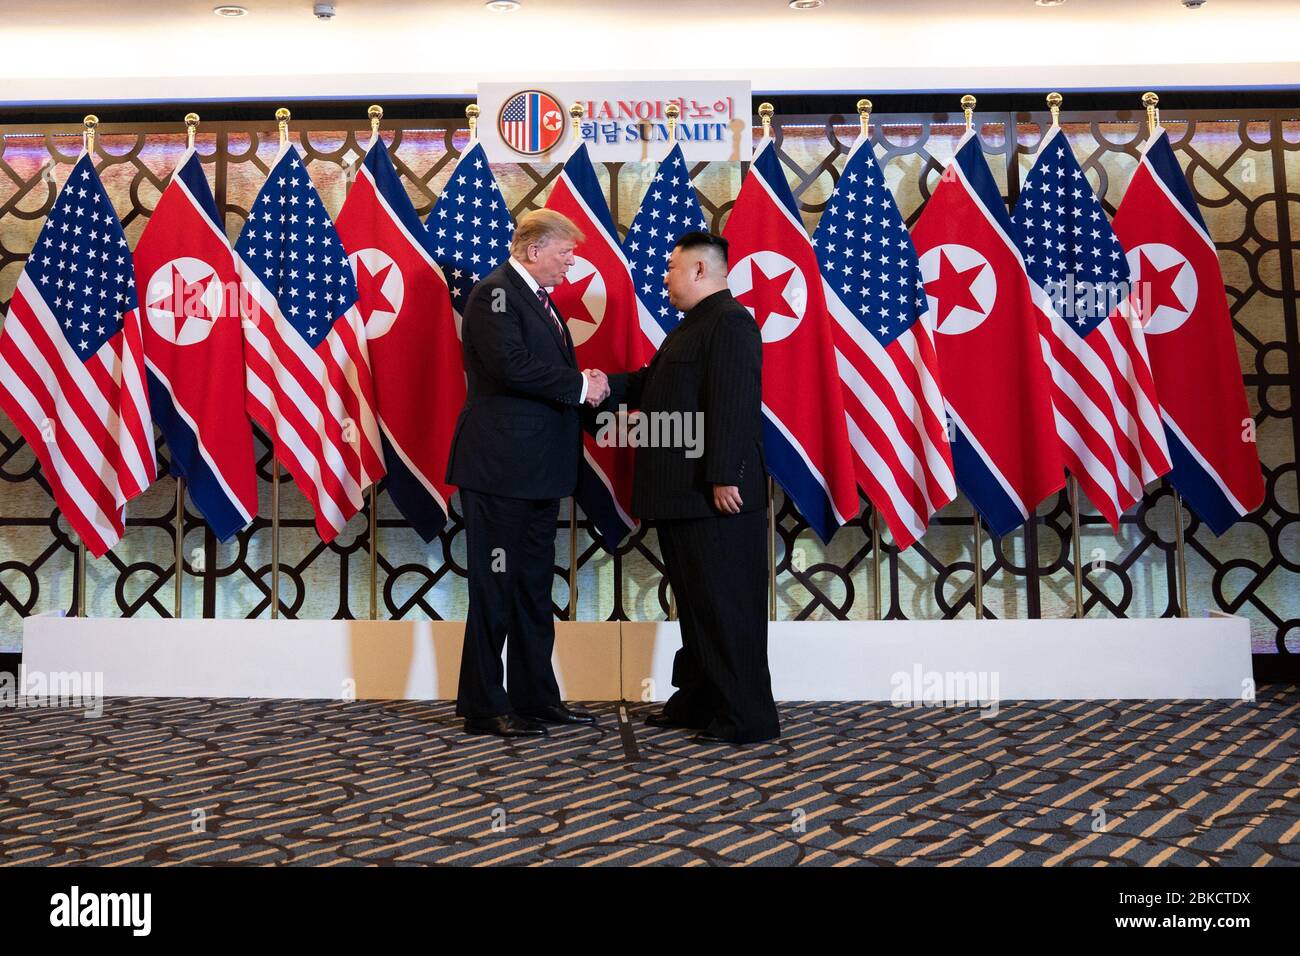 President Donald J. Trump is greeted by Kim Jong Un, Chairman of the State Affairs Commission of the Democratic People’s Republic of Korea Wednesday, Feb. 27, 2019, at the Sofitel Legend Metropole hotel in Hanoi, for their second summit meeting. President Trump's Trip to Vietnam Stock Photo